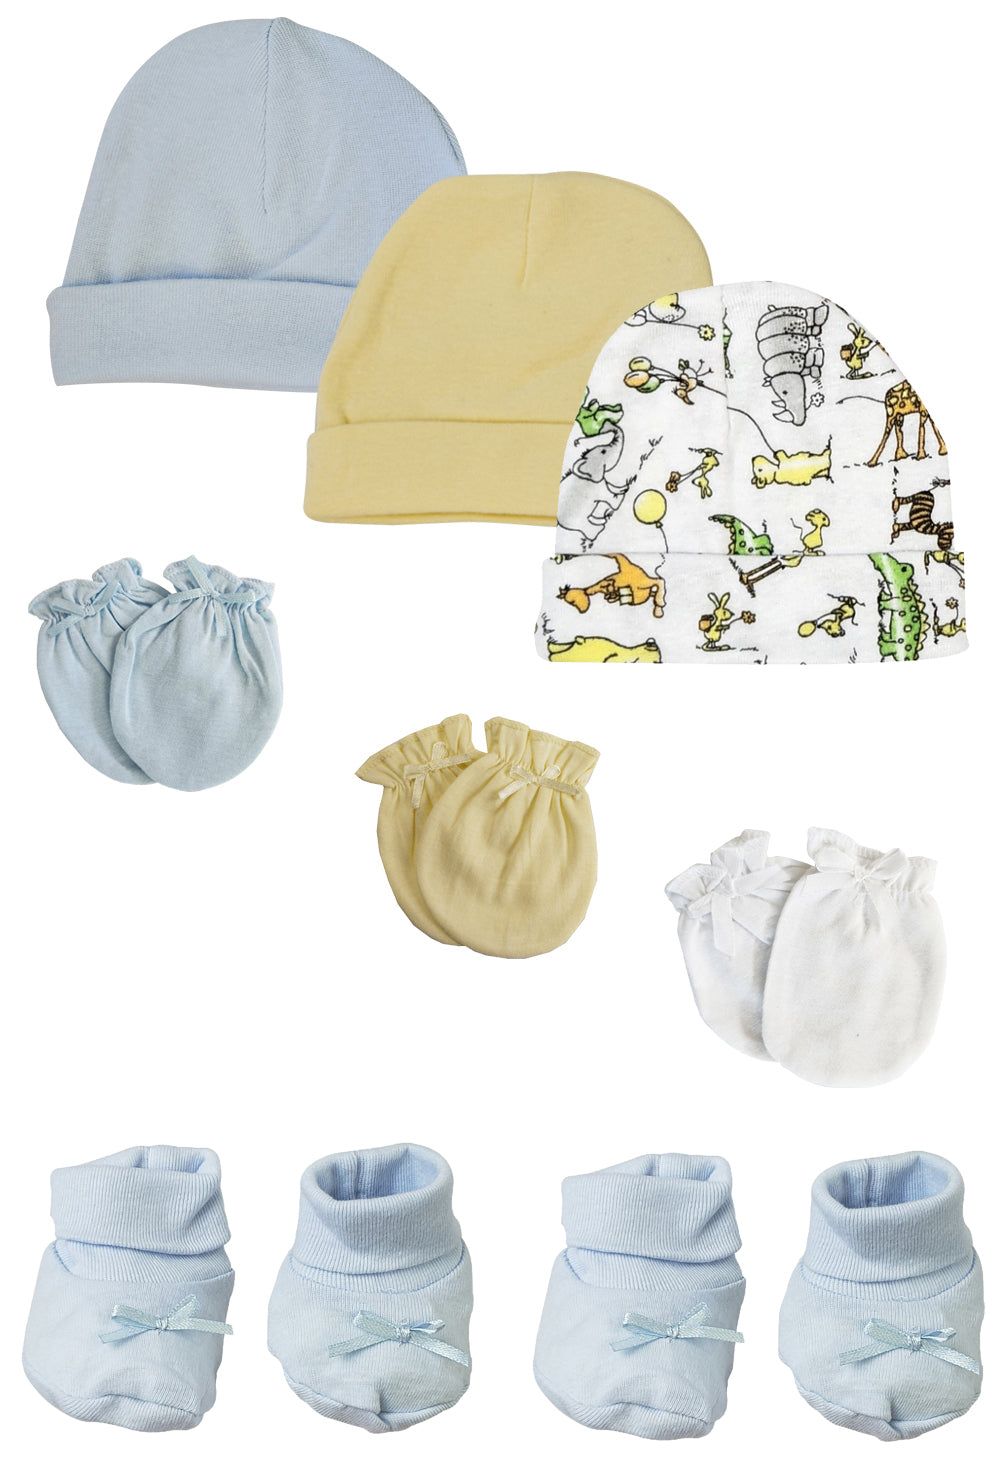 Preemie Baby Boy Caps with Infant Mittens and Booties - 8 Pack NC_0211